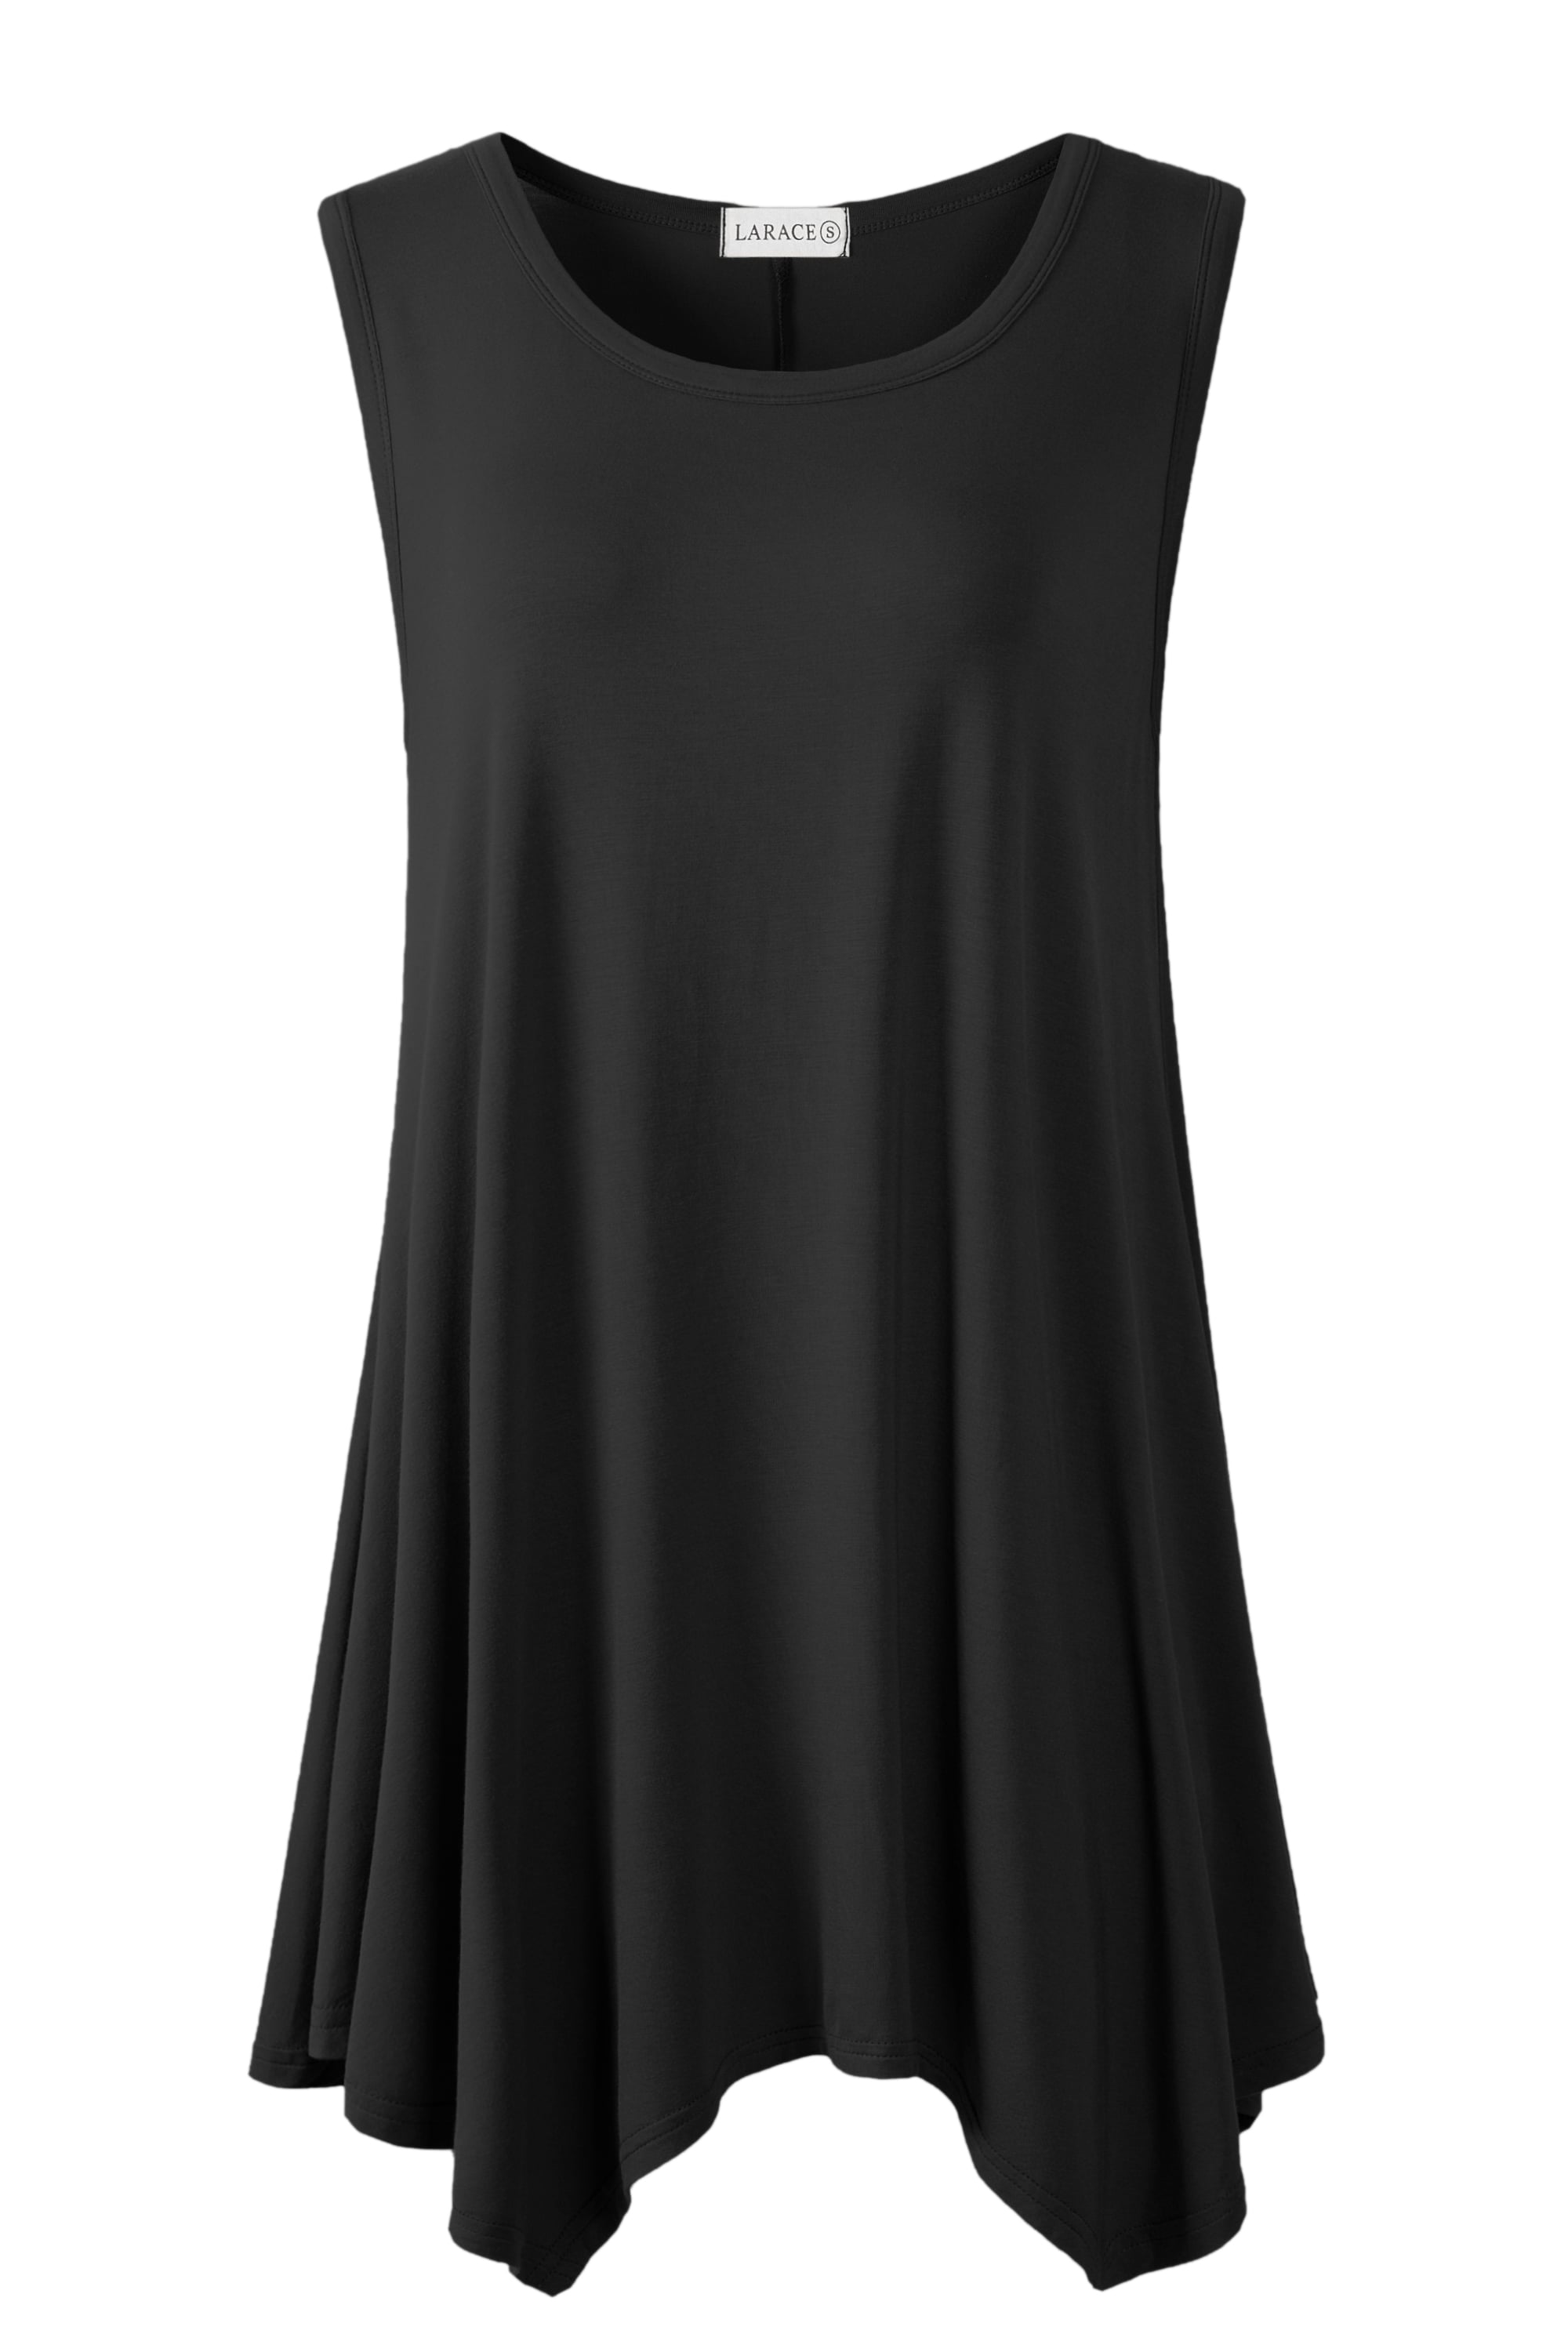 Womens Sleeveless Stretchy Ruched Front Flowy Tunic Tube Top Strapless  Shirt Blouse Pleated Tunic Flare Tanks Tops Black